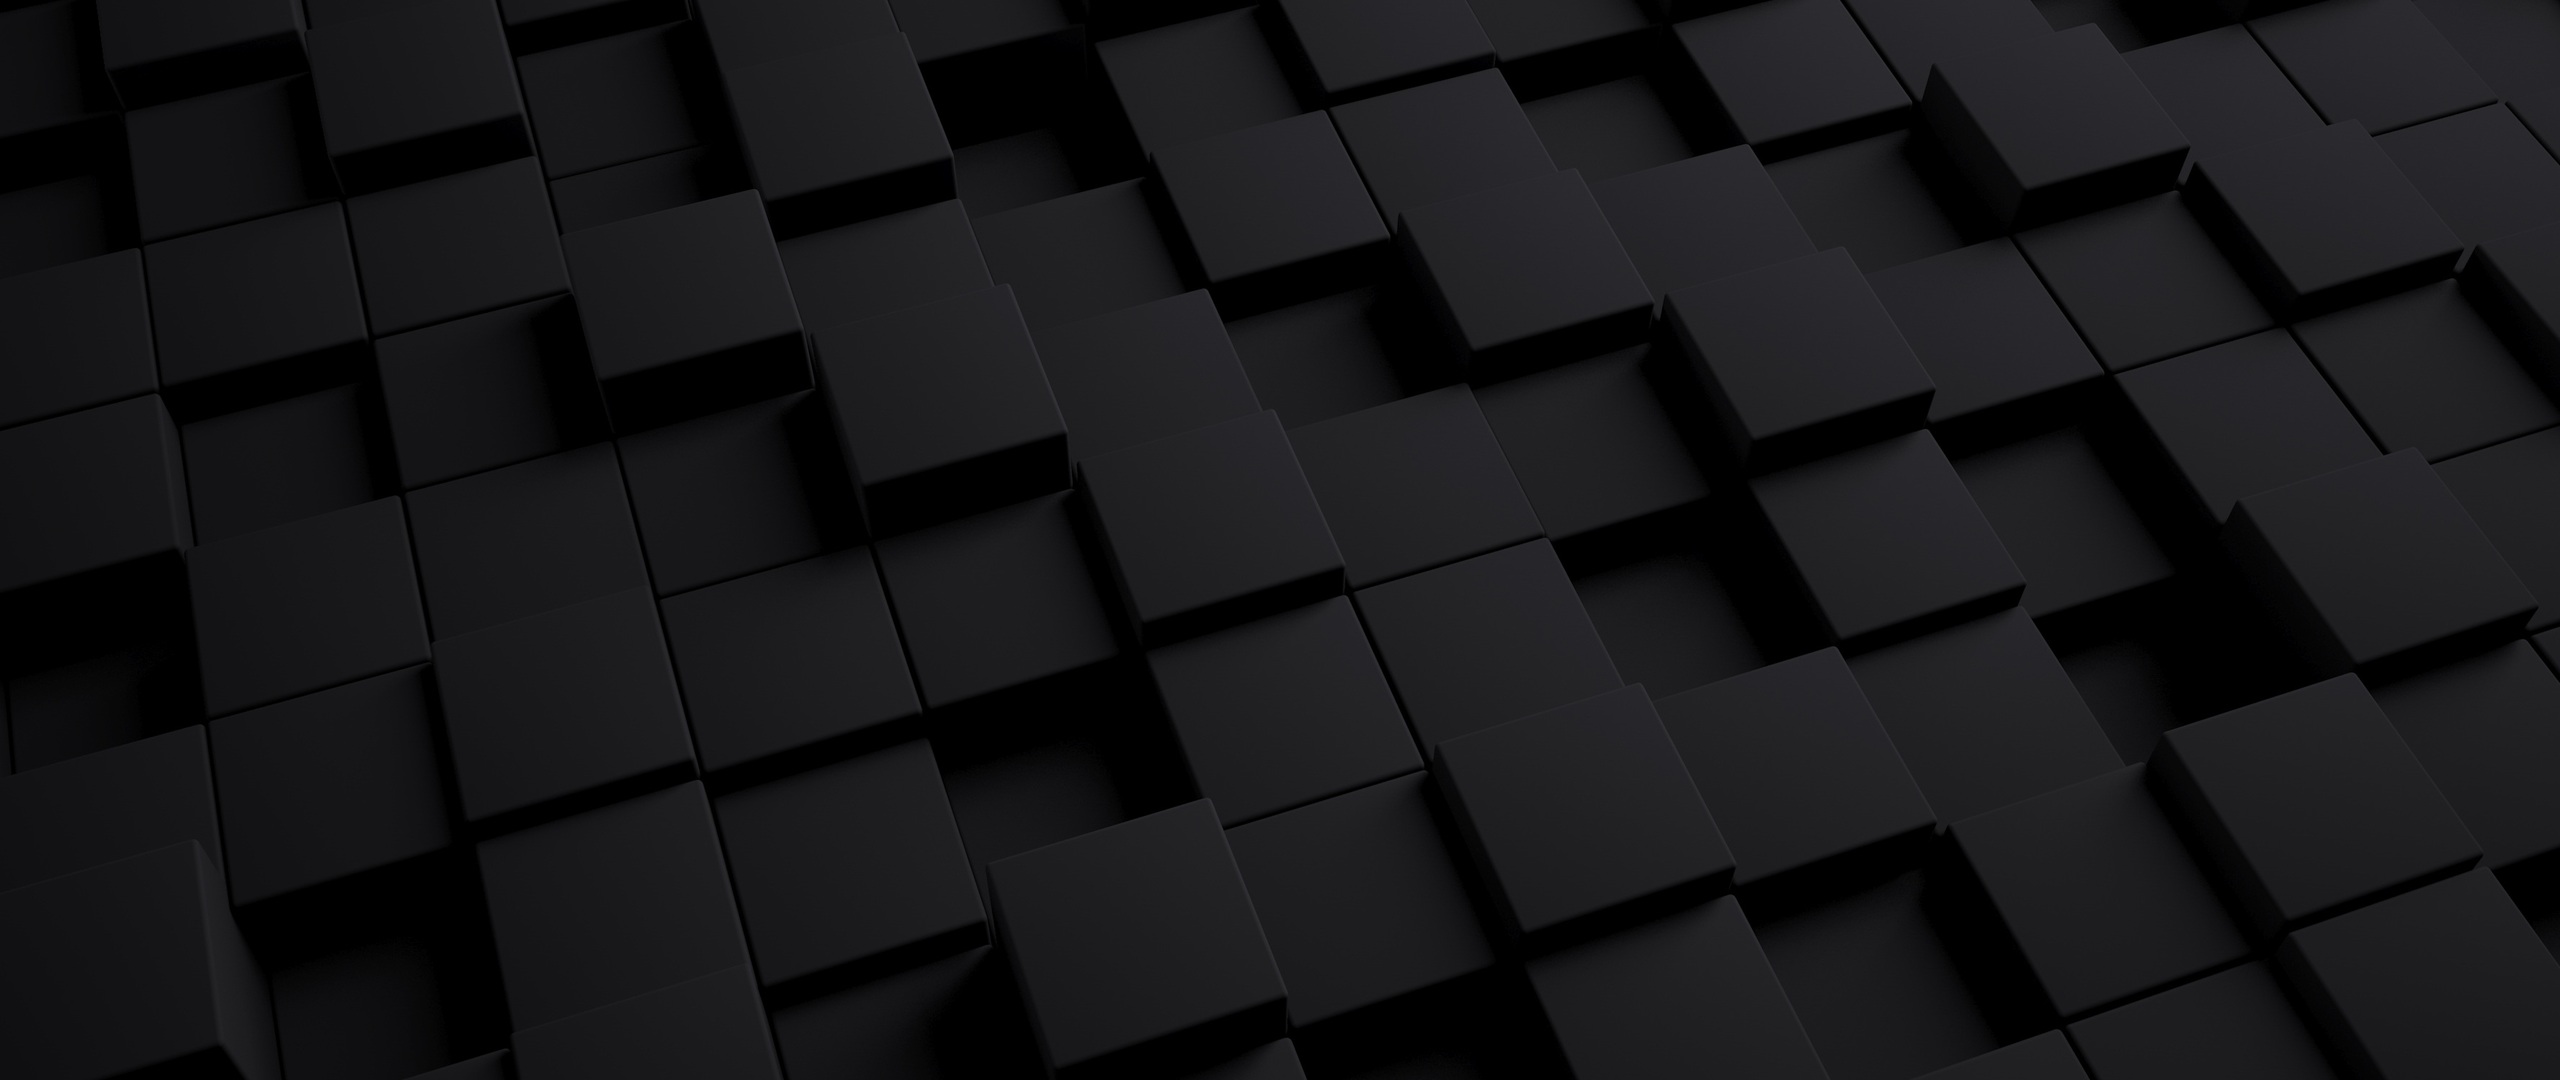 4k-wallpapers. simple-background-wallpapers. black-wallpapers. cube-wallpap...